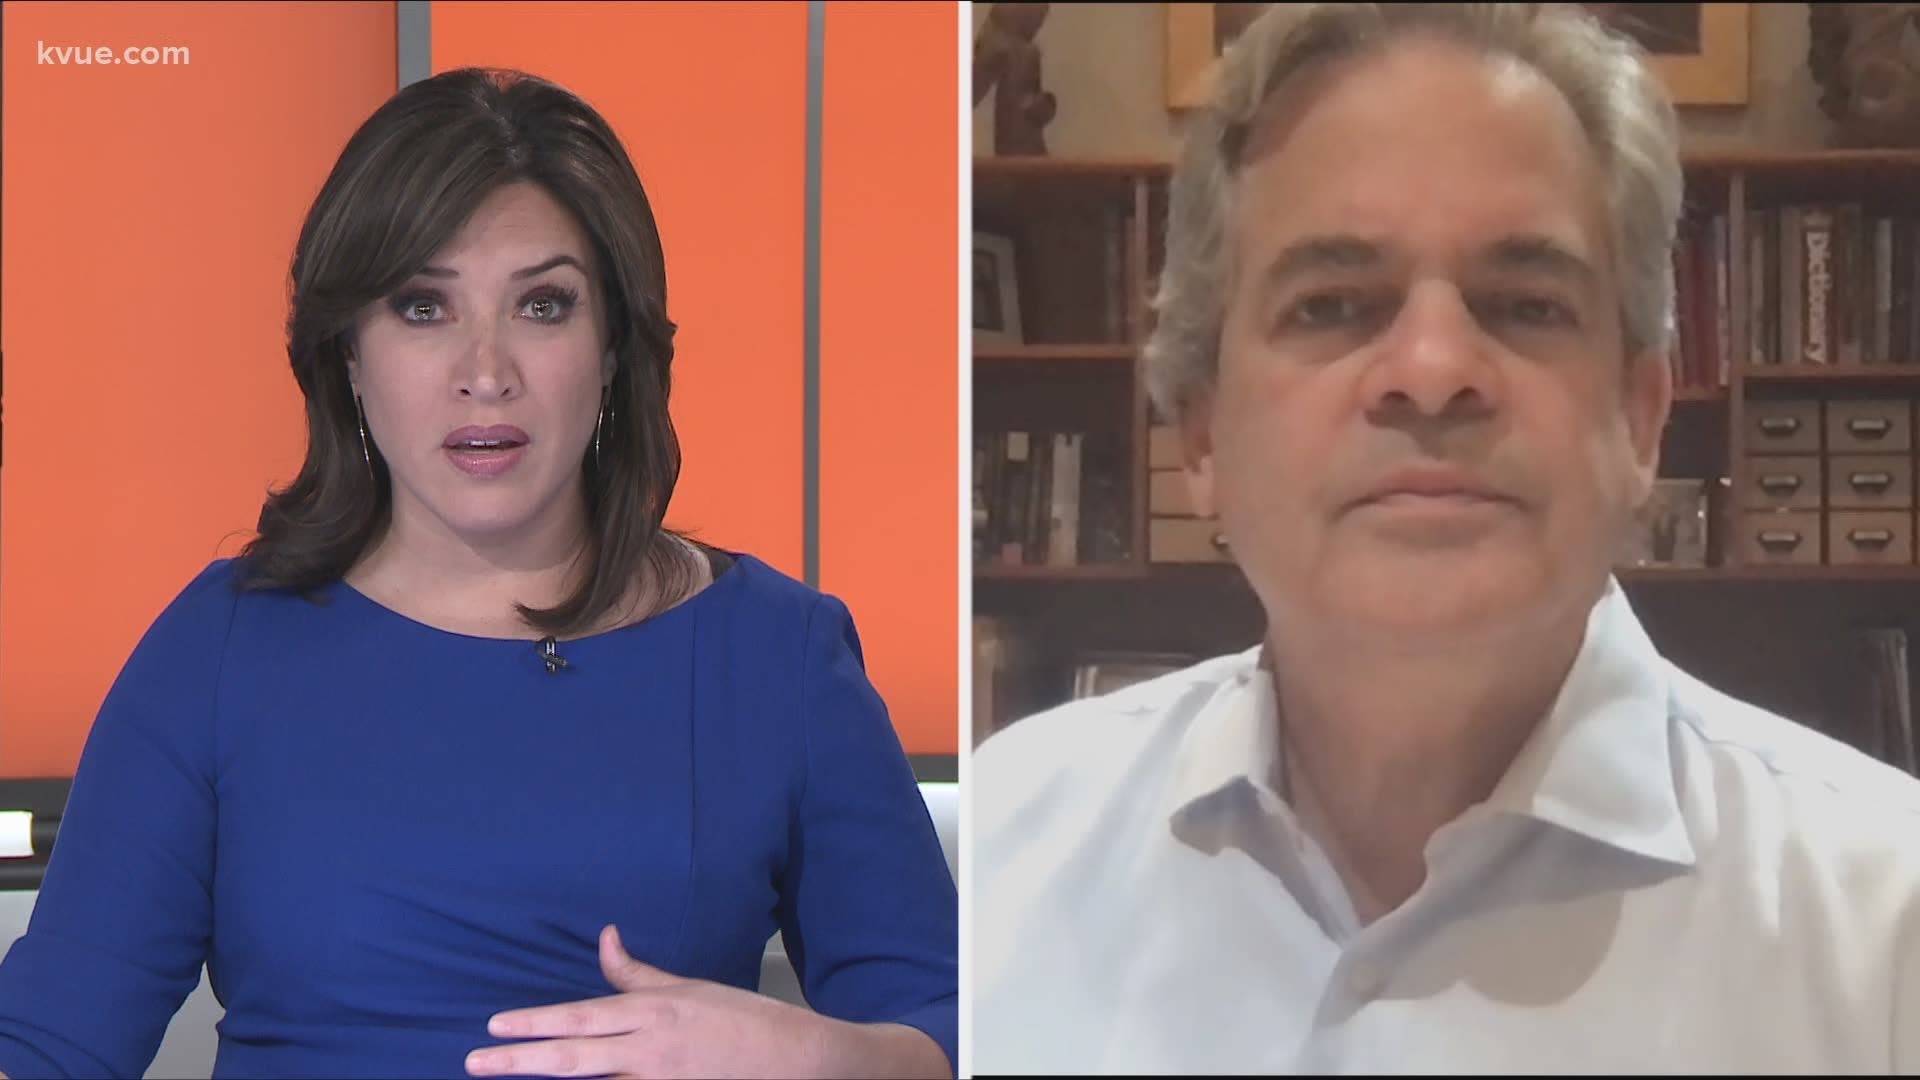 Mayor Steve Adler joined KVUE Daybreak on Monday, June 1, to talk about the weekend protests.